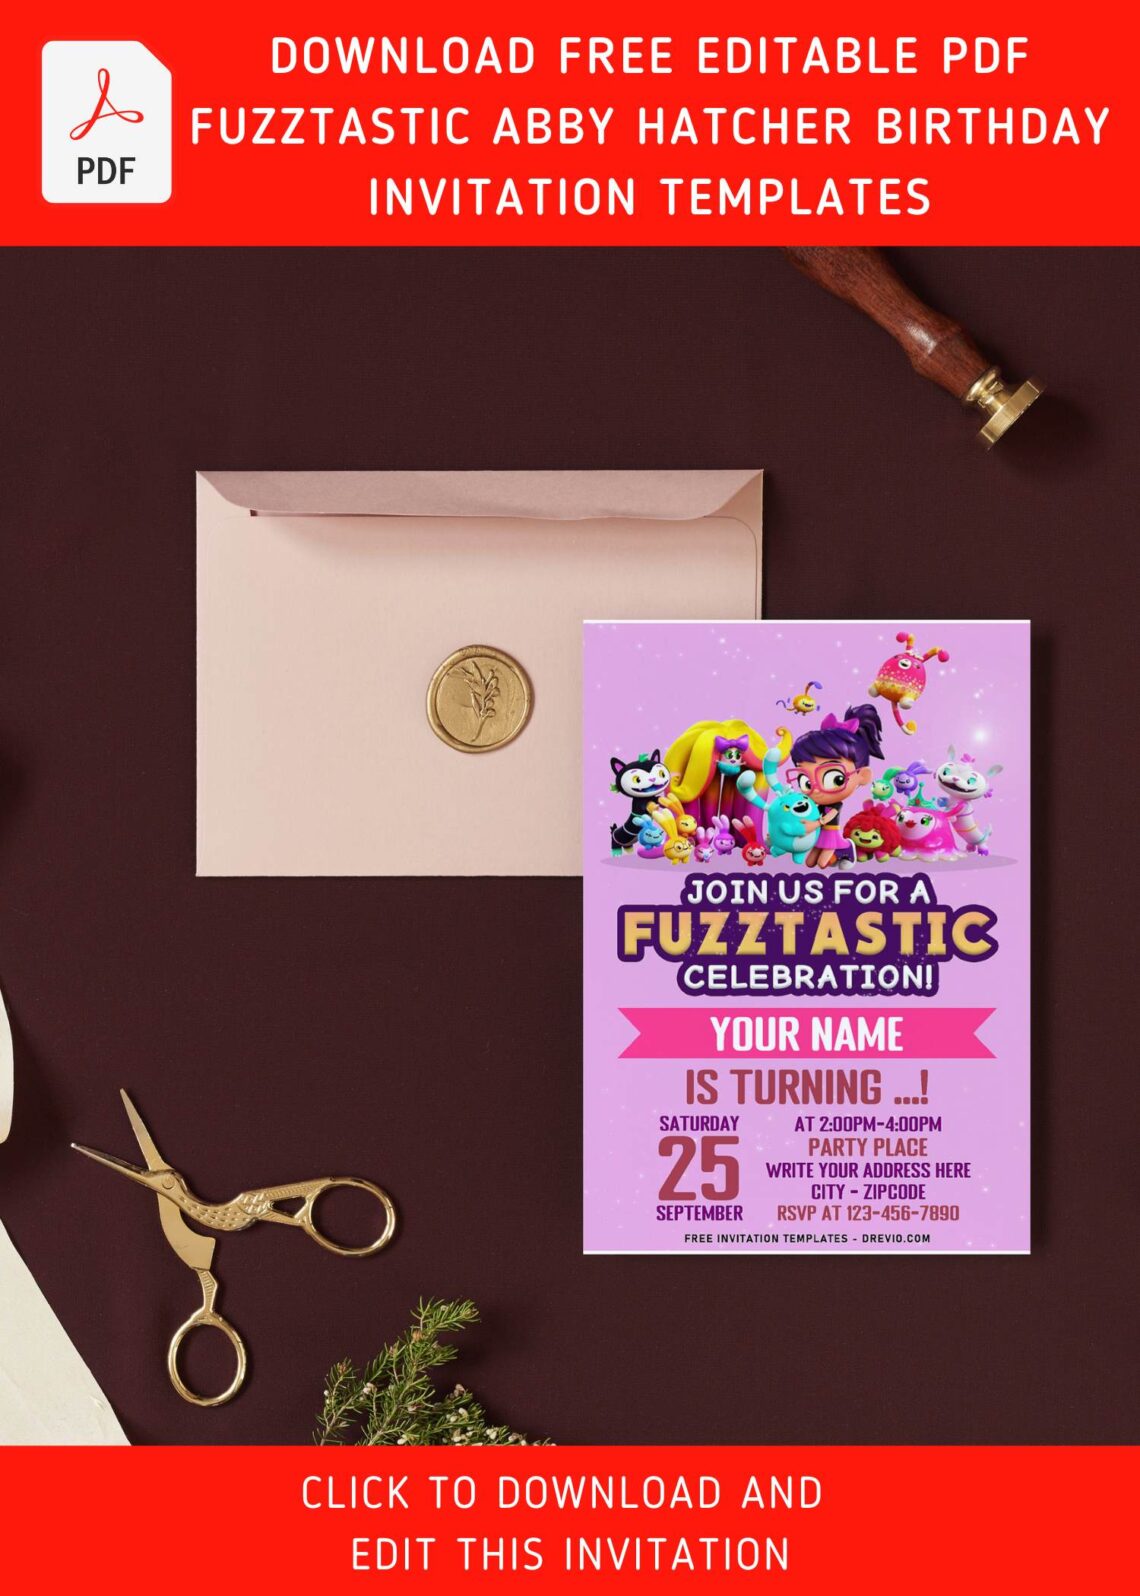 (Free Editable PDF) Fuzz-Tastic Abby Hatcher And Her Toy-Friends Birthday Invitation Templates with adorable Abby